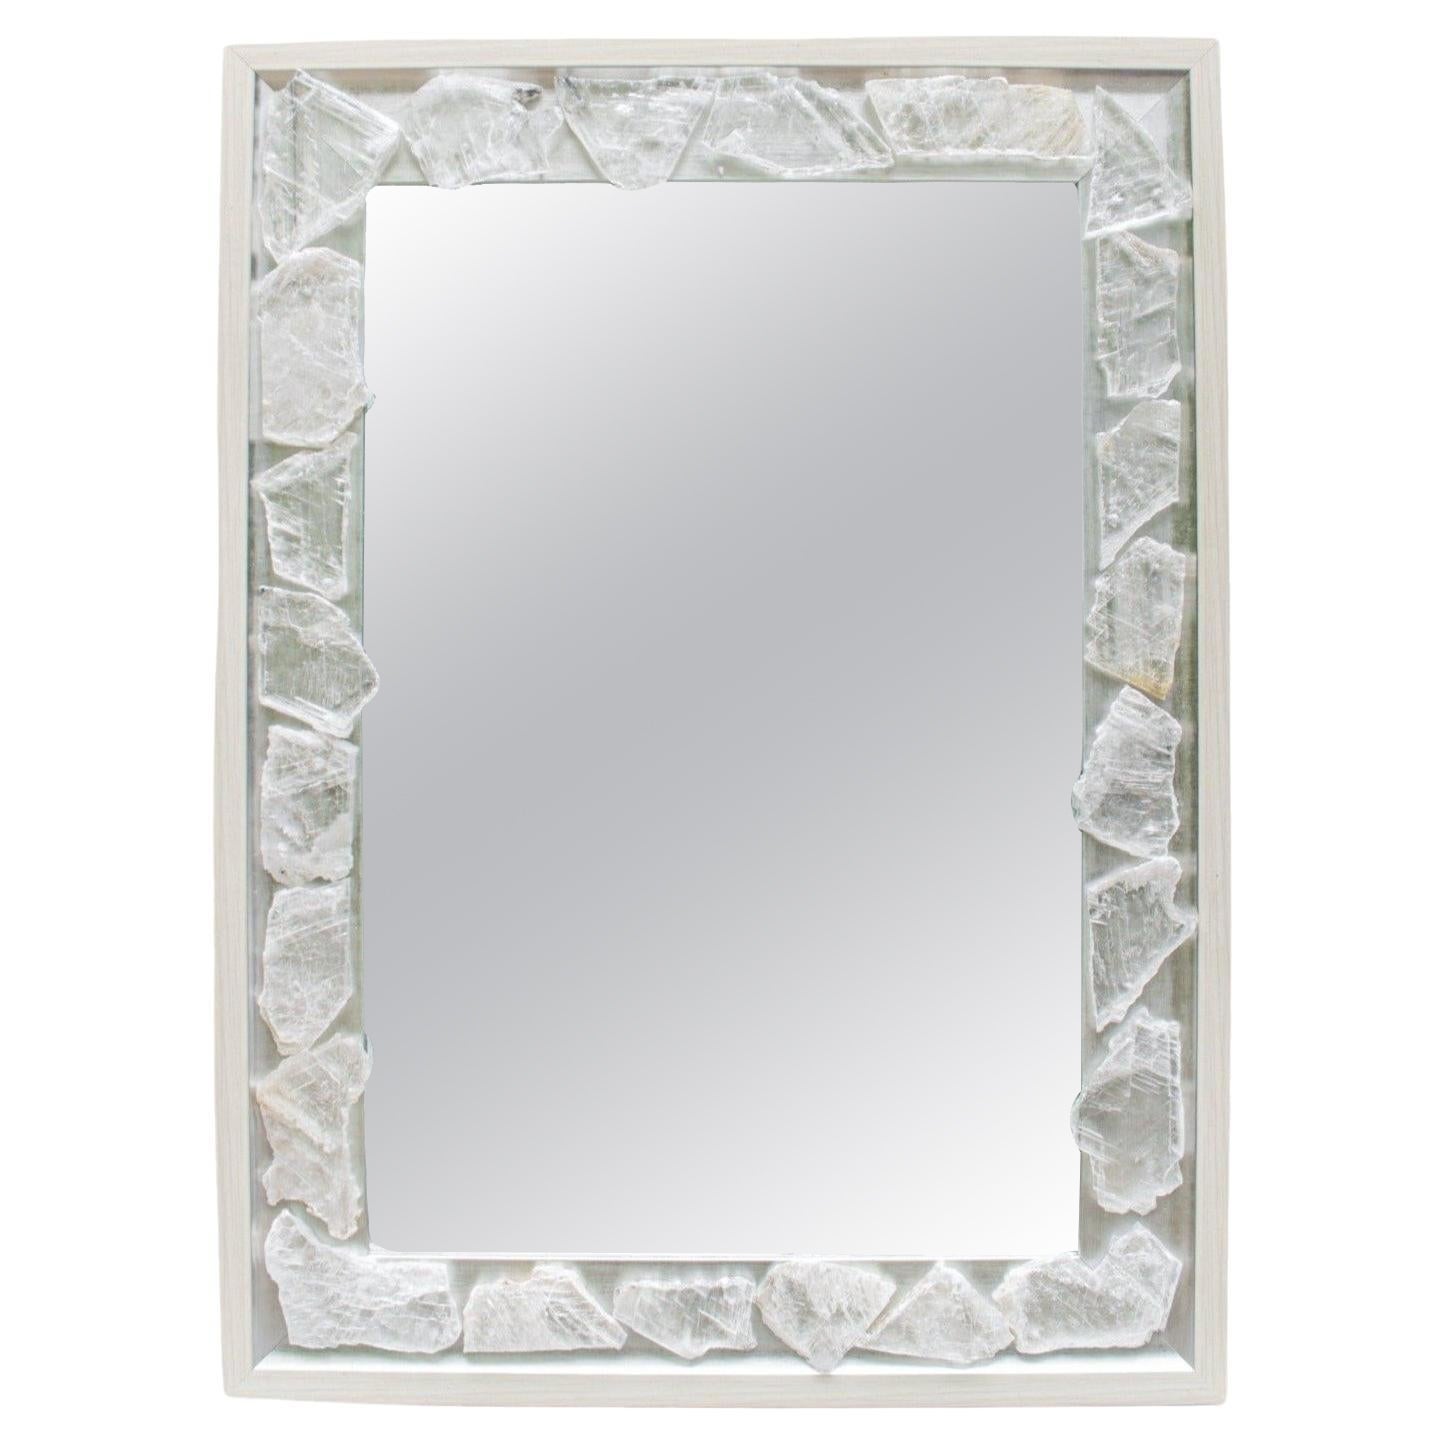 Selenite Mirror with a Silver and Cream Frame by Interi For Sale